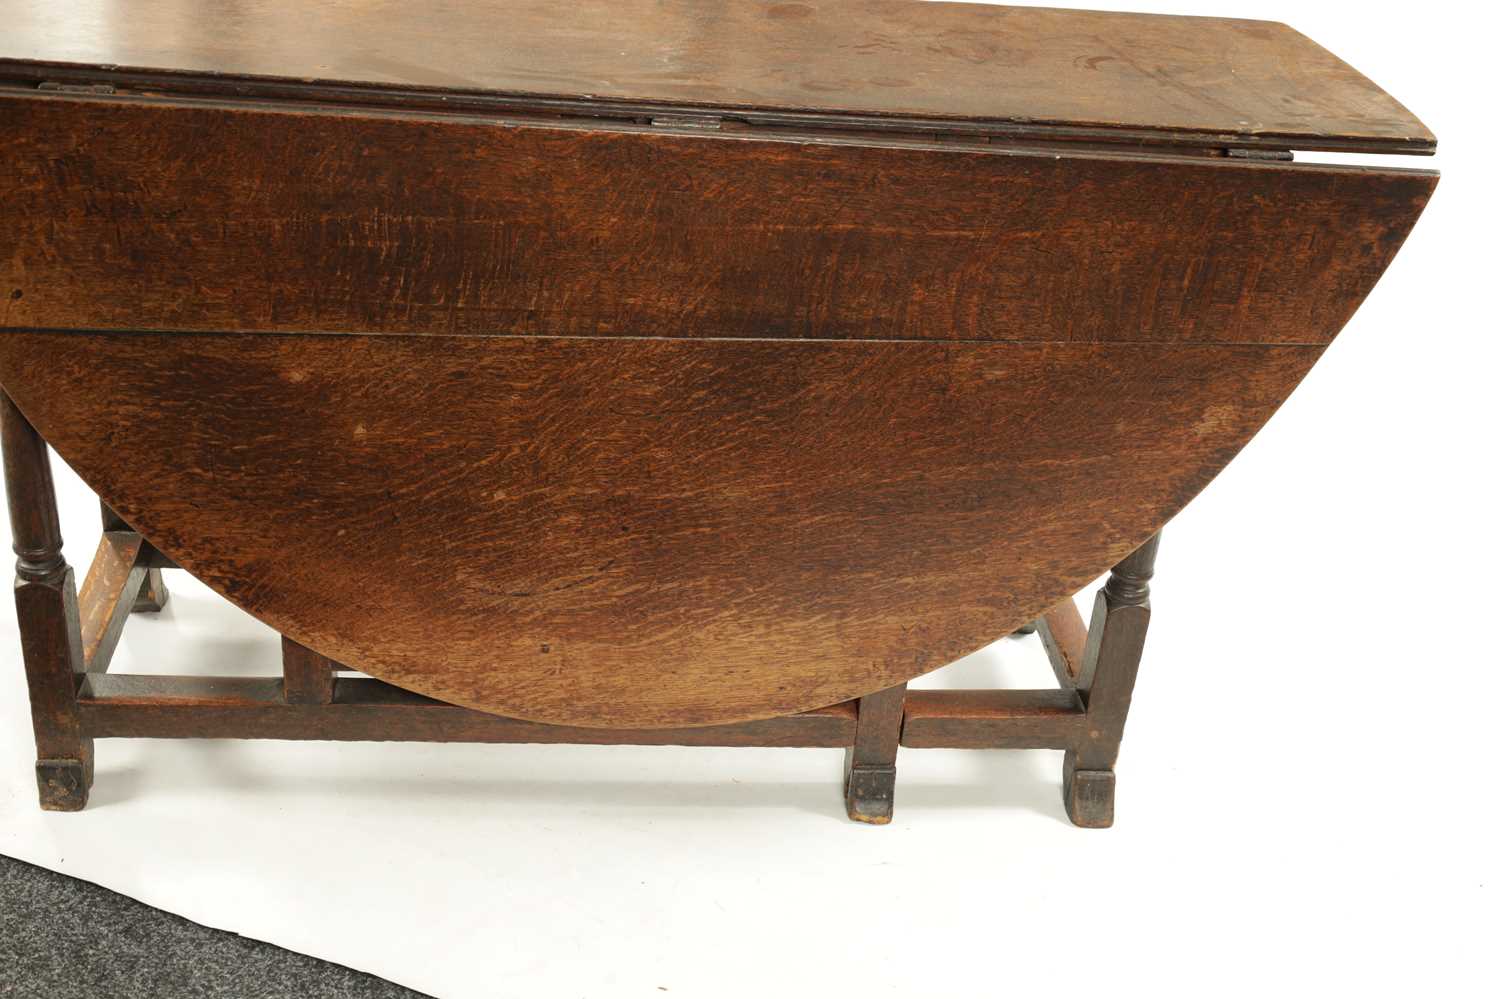 A LATE 17TH CENTURY OAK GATELEG TABLE WITH BREGANZA FEET - Image 6 of 6